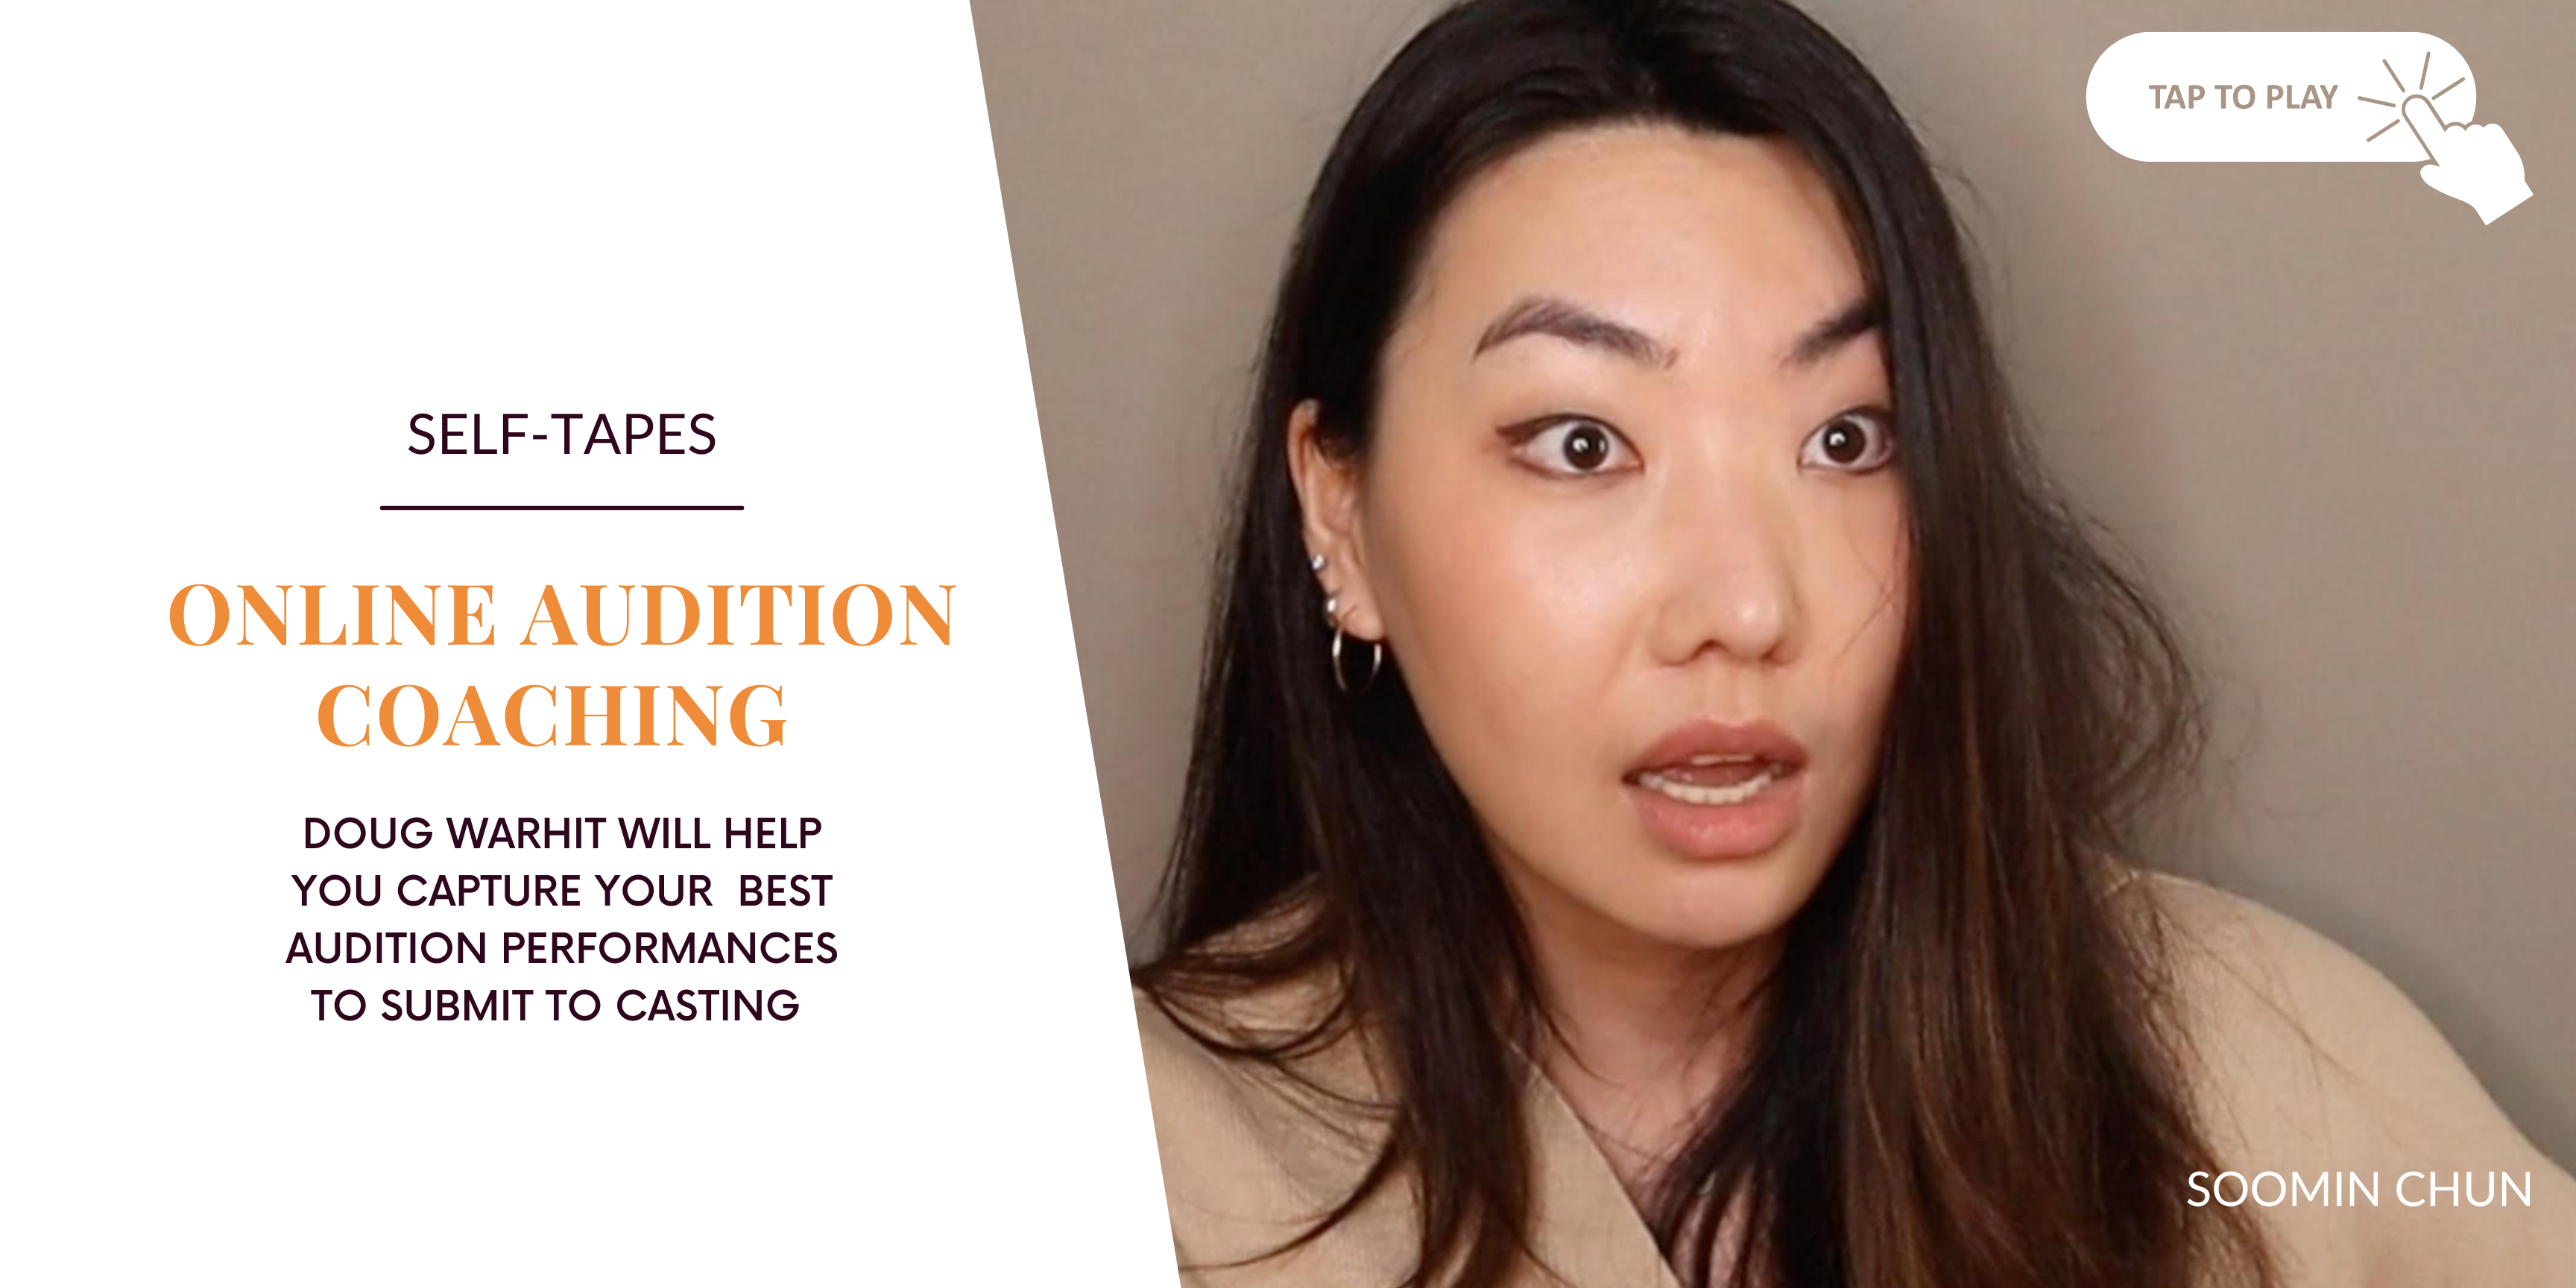 Online audition coaching for self-tapes Doug Warhit will help you capture your best audition performances to submit to casting